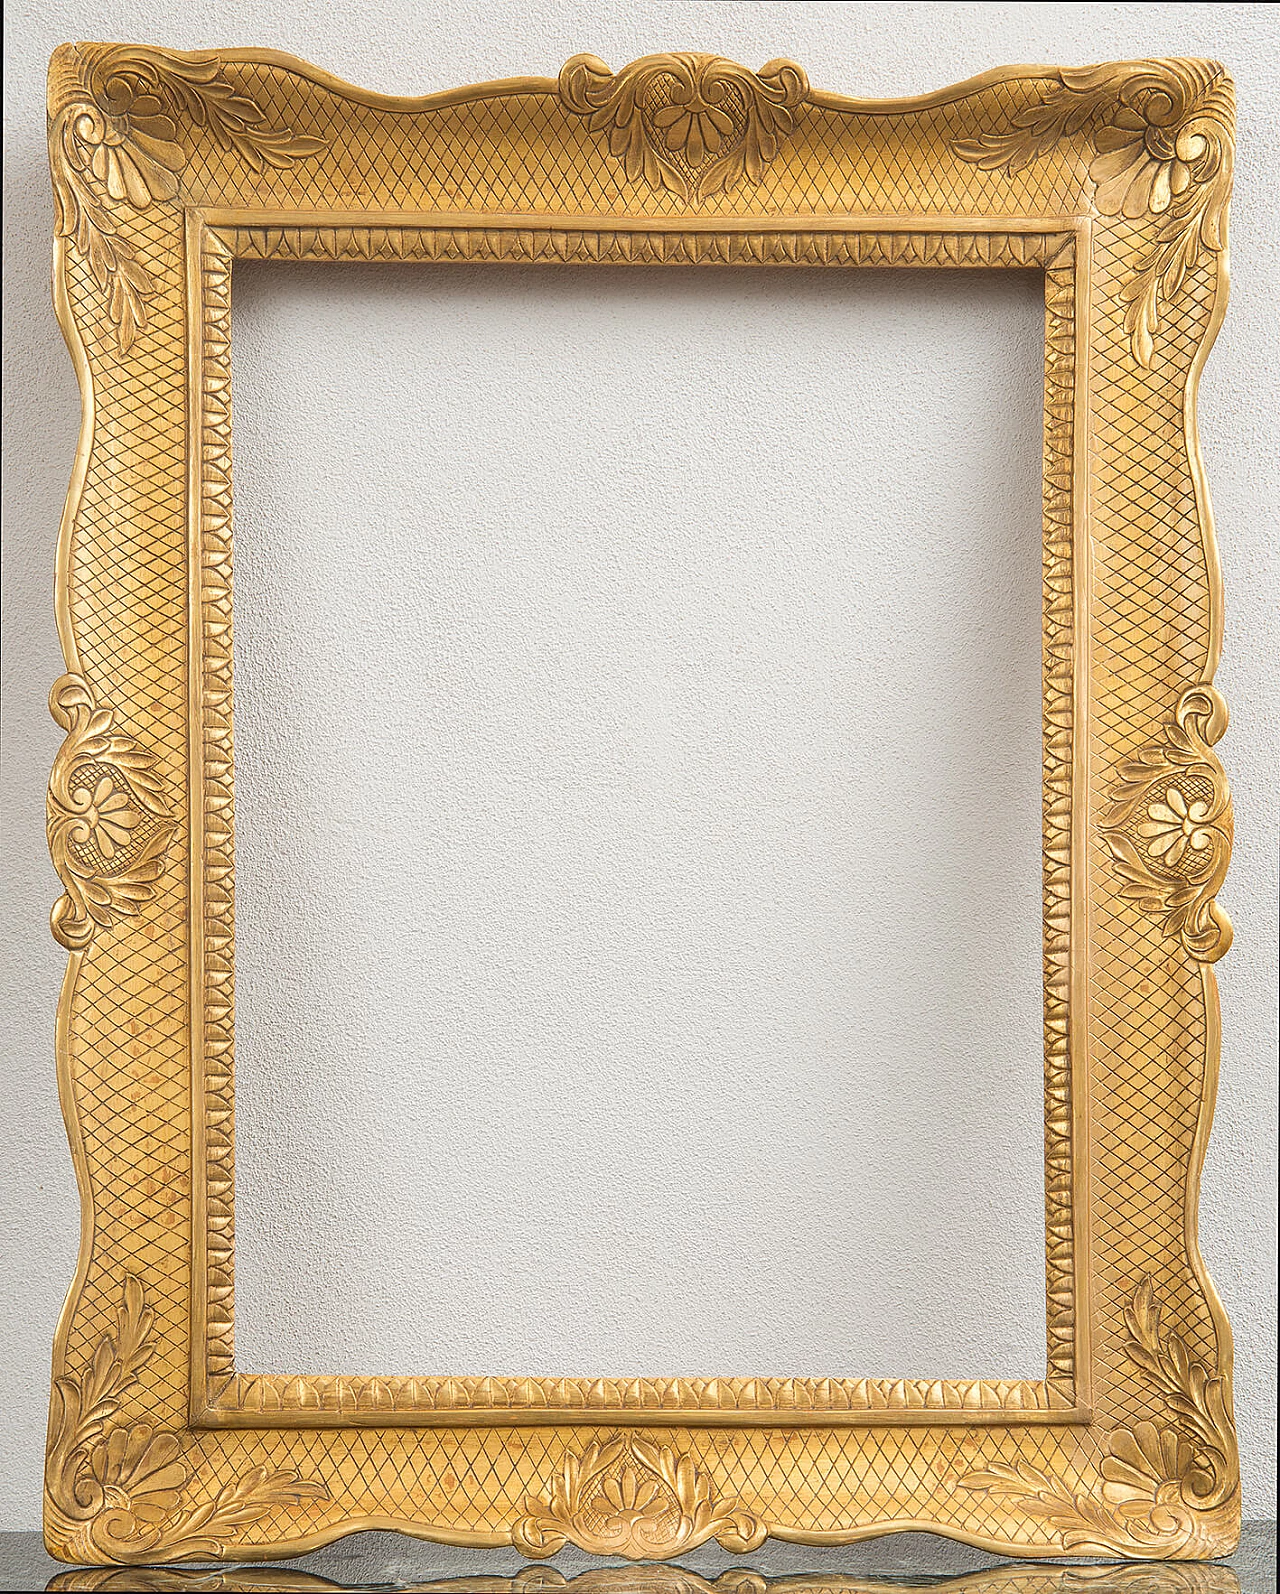 Neapolitan Empire gilded wood frame, early 19th century 1